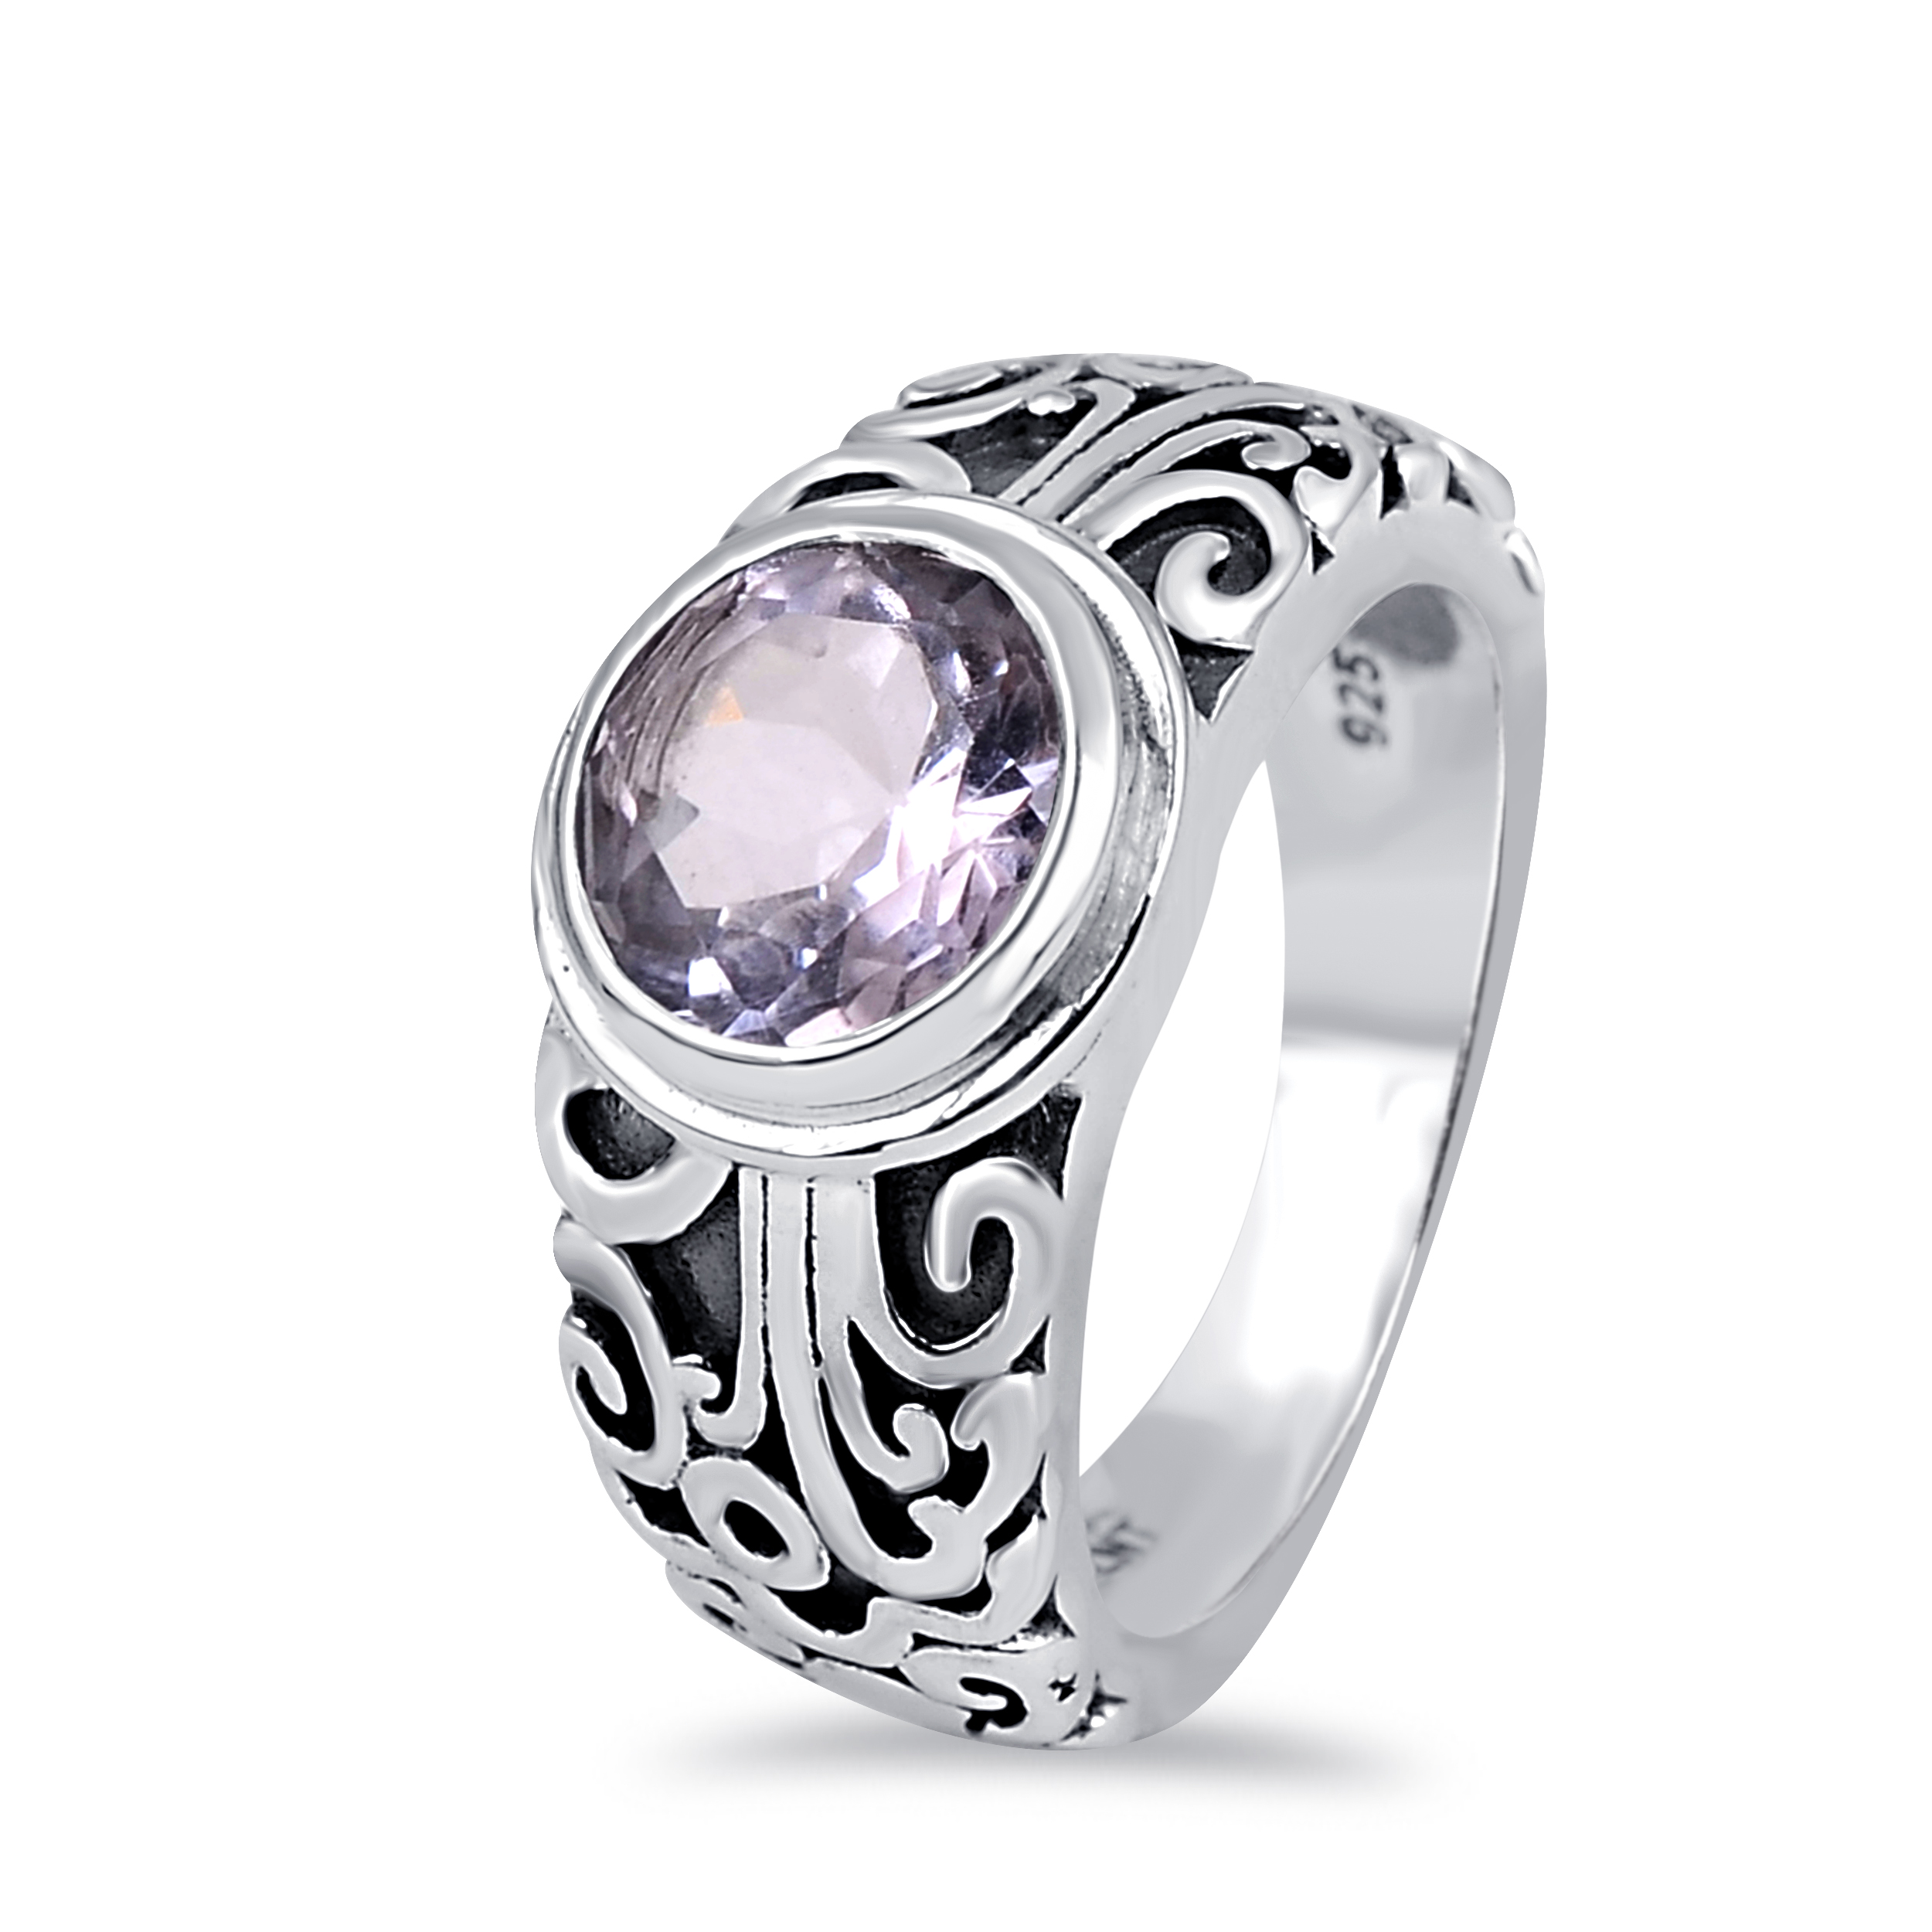 Gorgeous Filigree Vintage 1.78 Ctw Round Pink Amethyst 925 Sterling Silver Classical Ring For Women By Orchid Jewelry - image 1 of 7